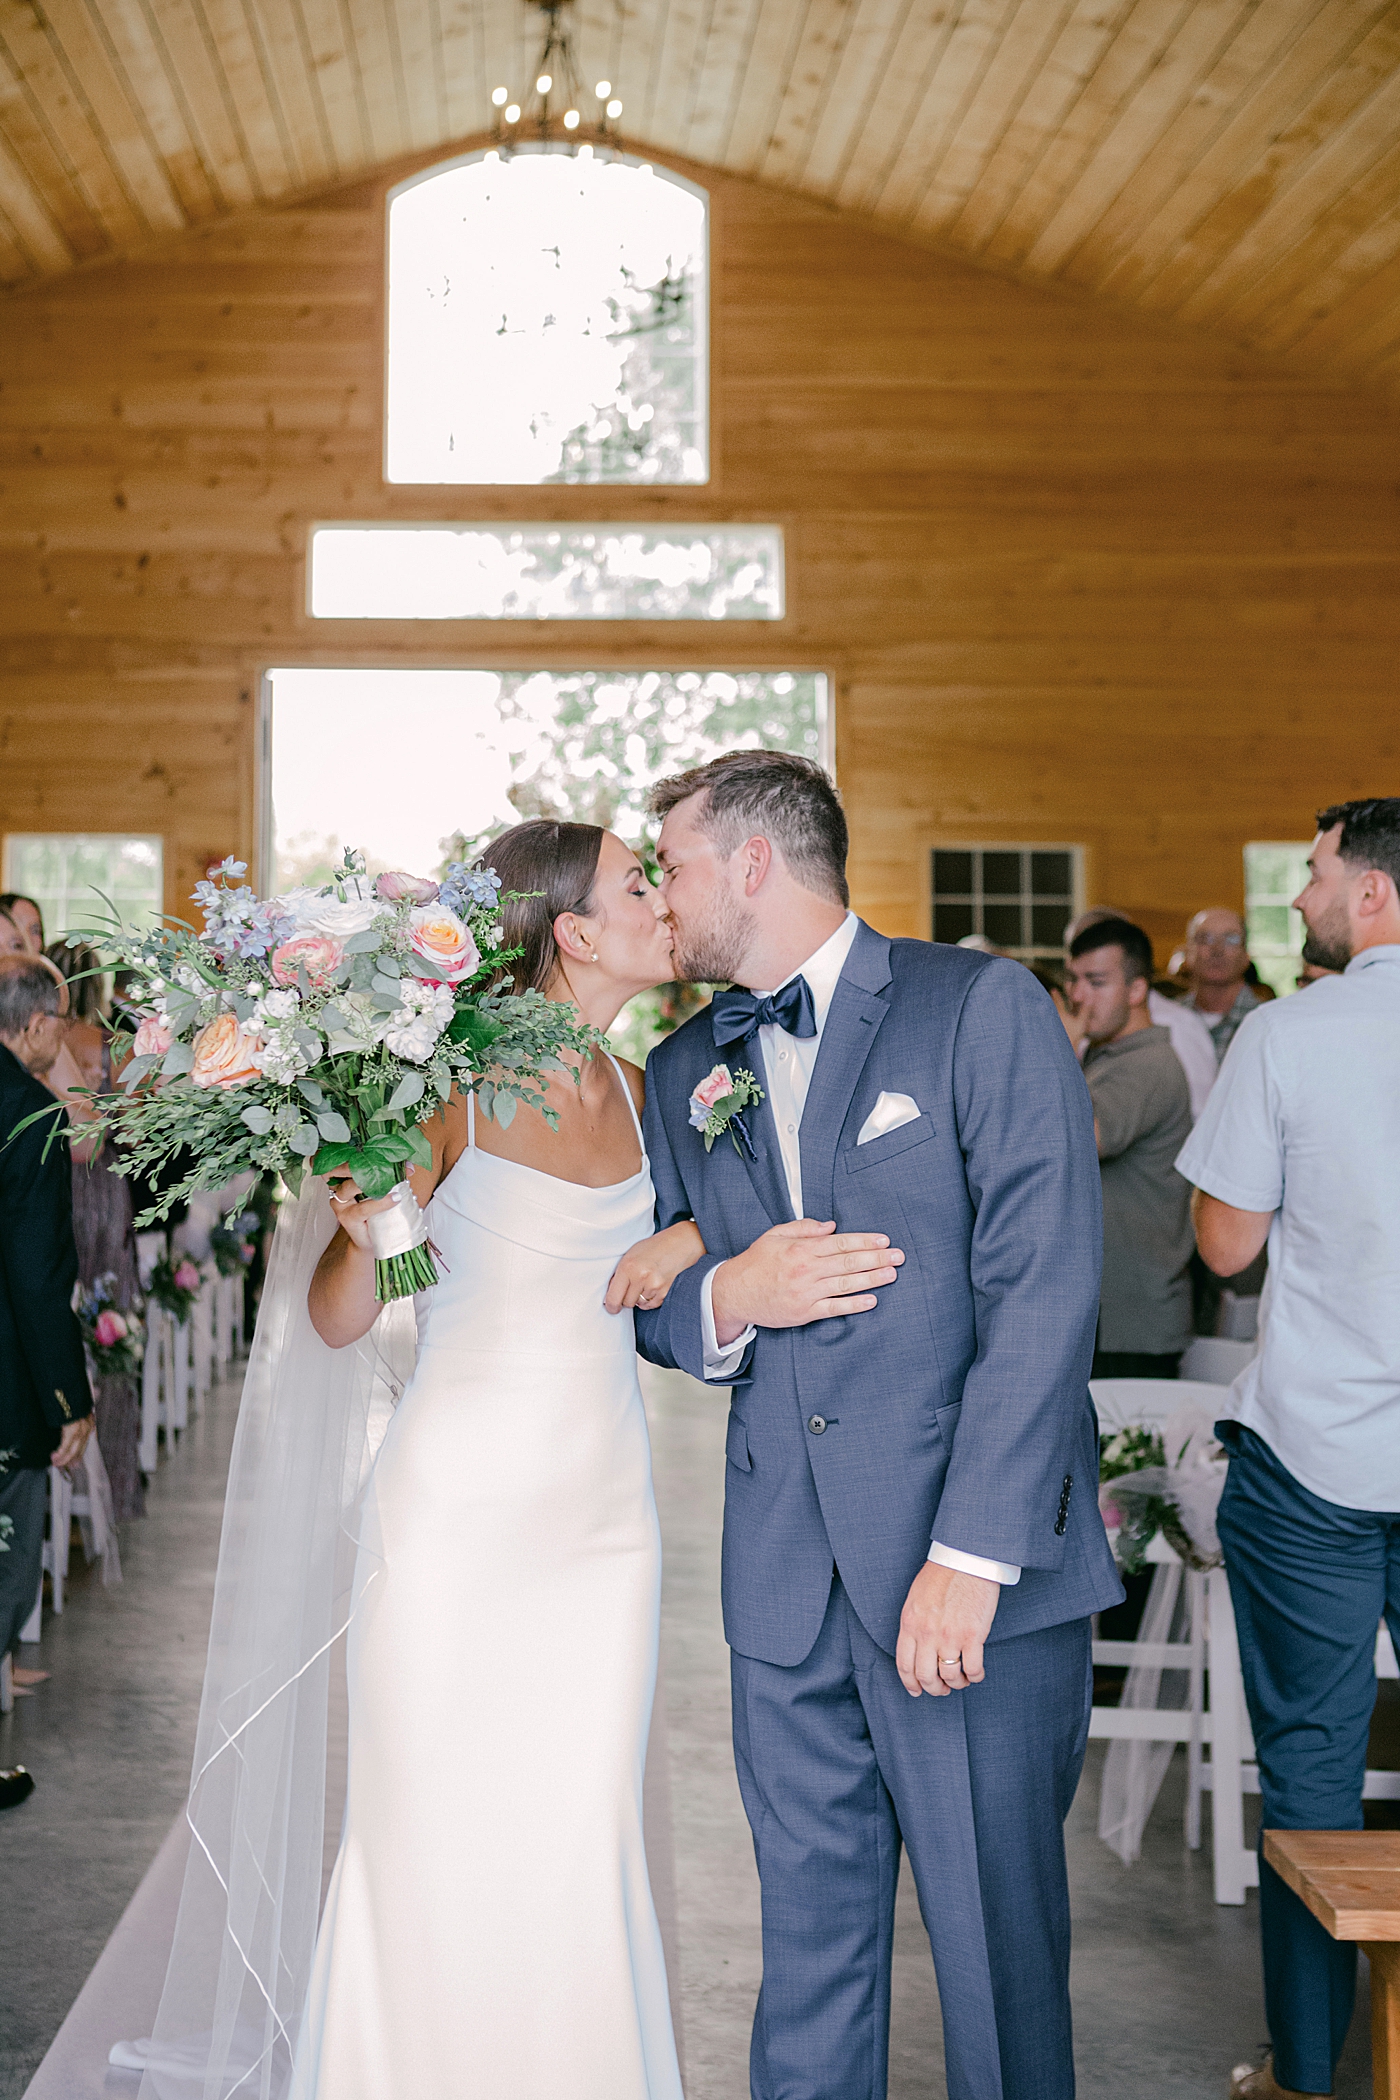 Bride and groom kissing walking down the aisle | Image by Hudson Valley Wedding Photographer Hope Helmuth